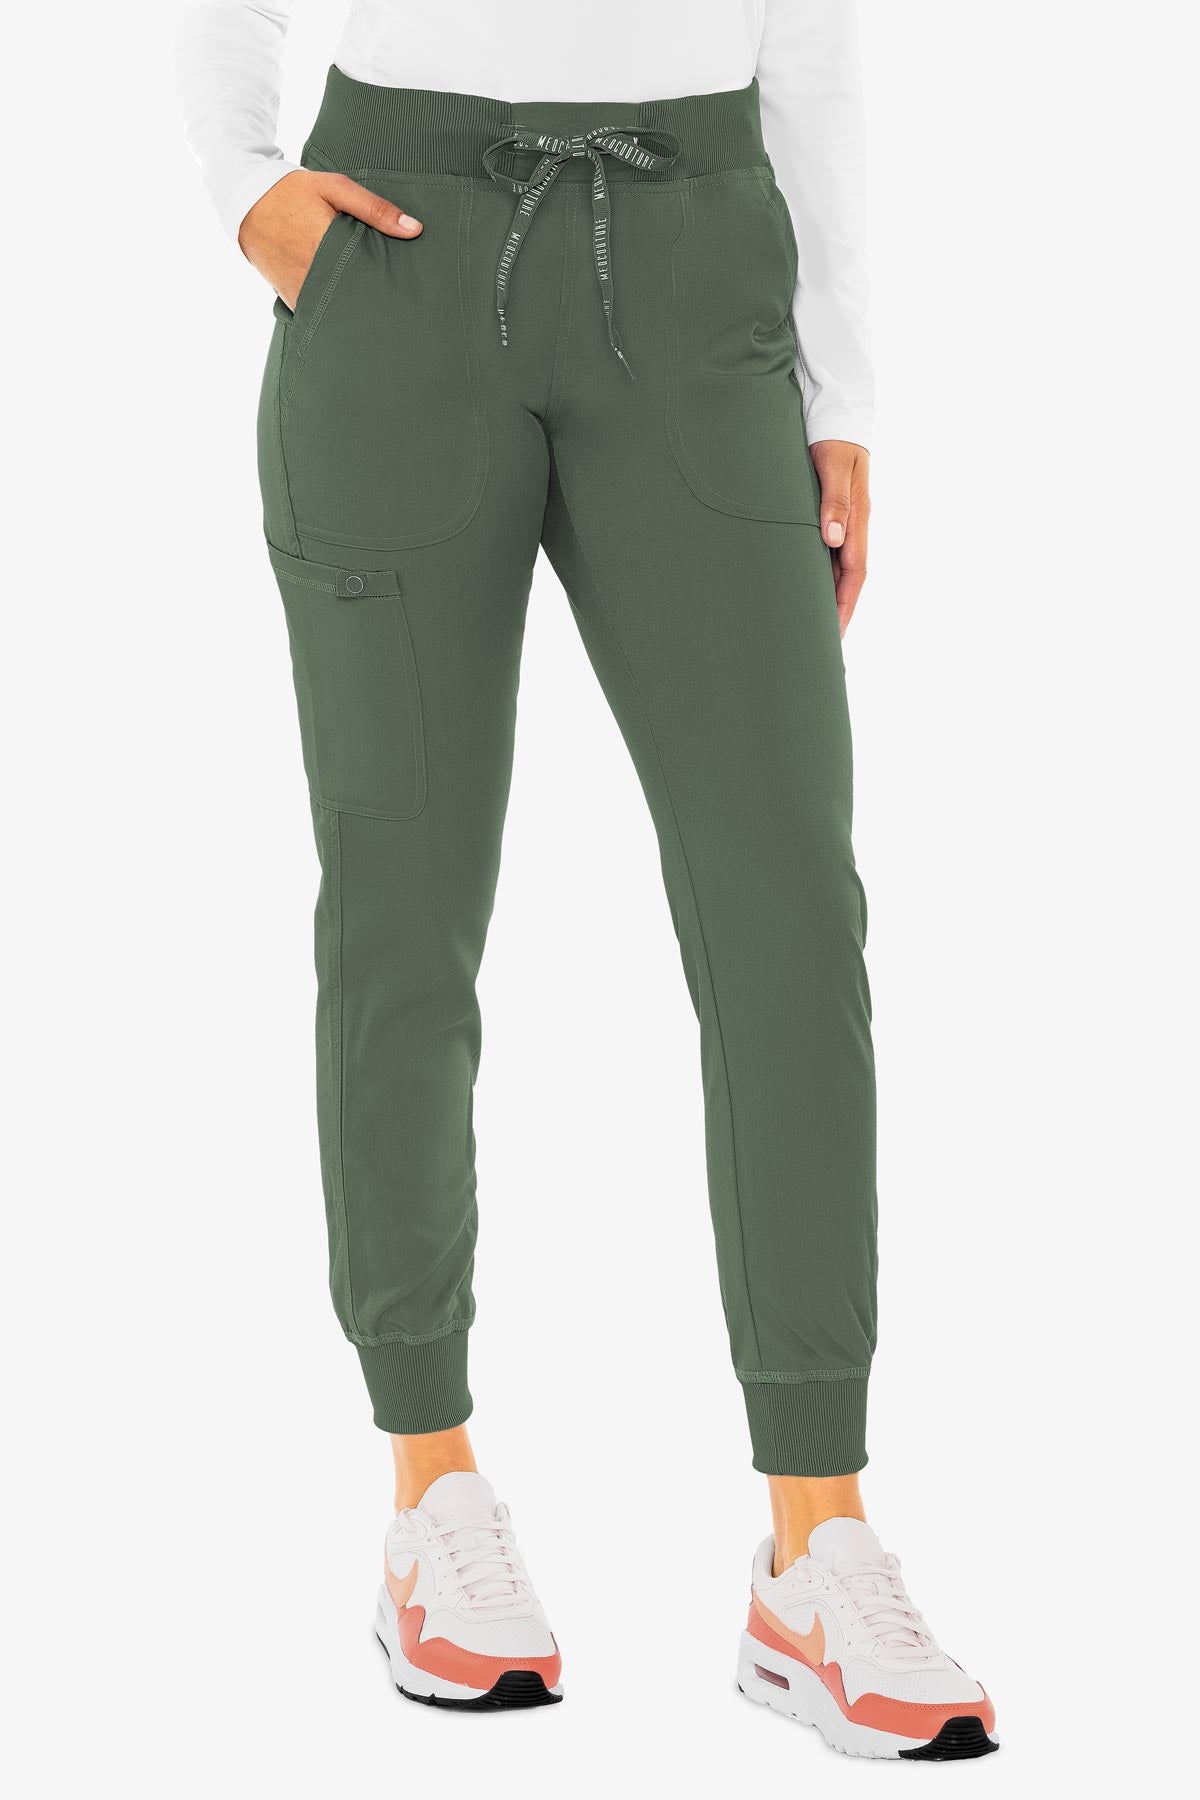 Med Couture Touch Jogger Yoga Pant | 7710